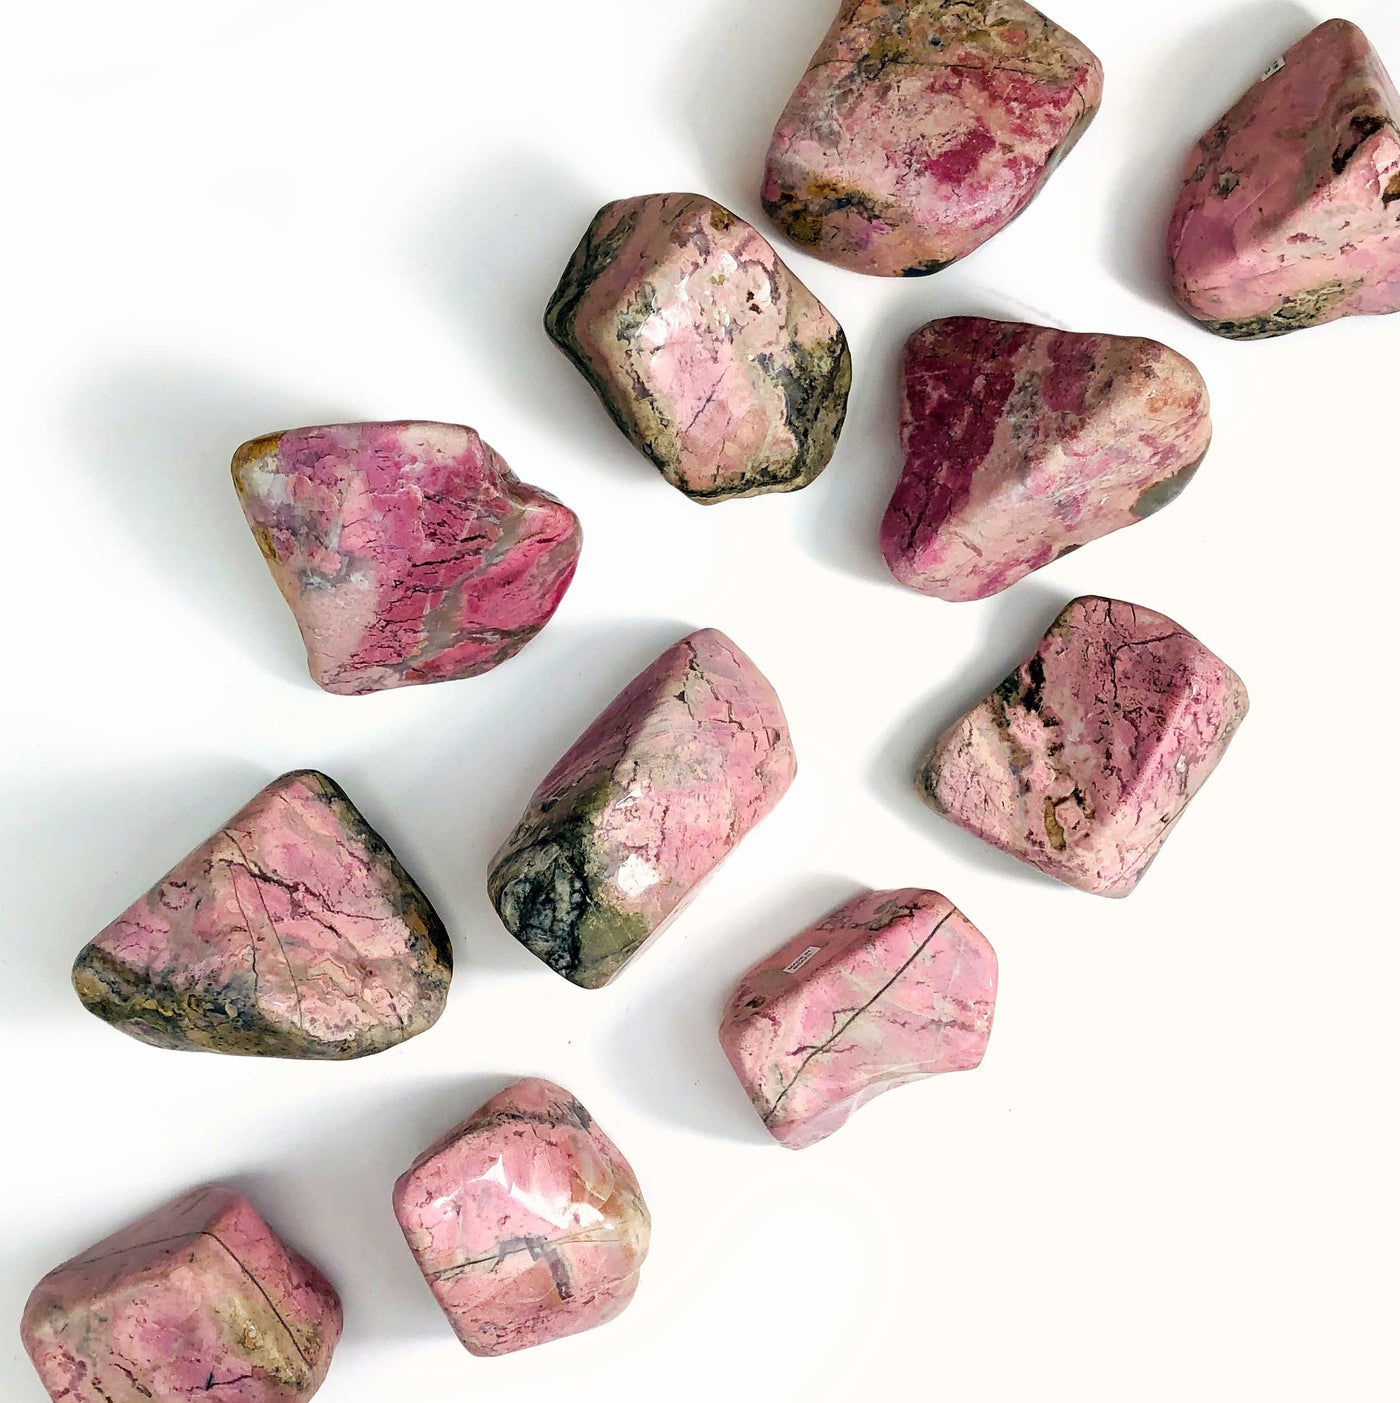 Rhodonite Tumbled Polished Stones scattered on white background